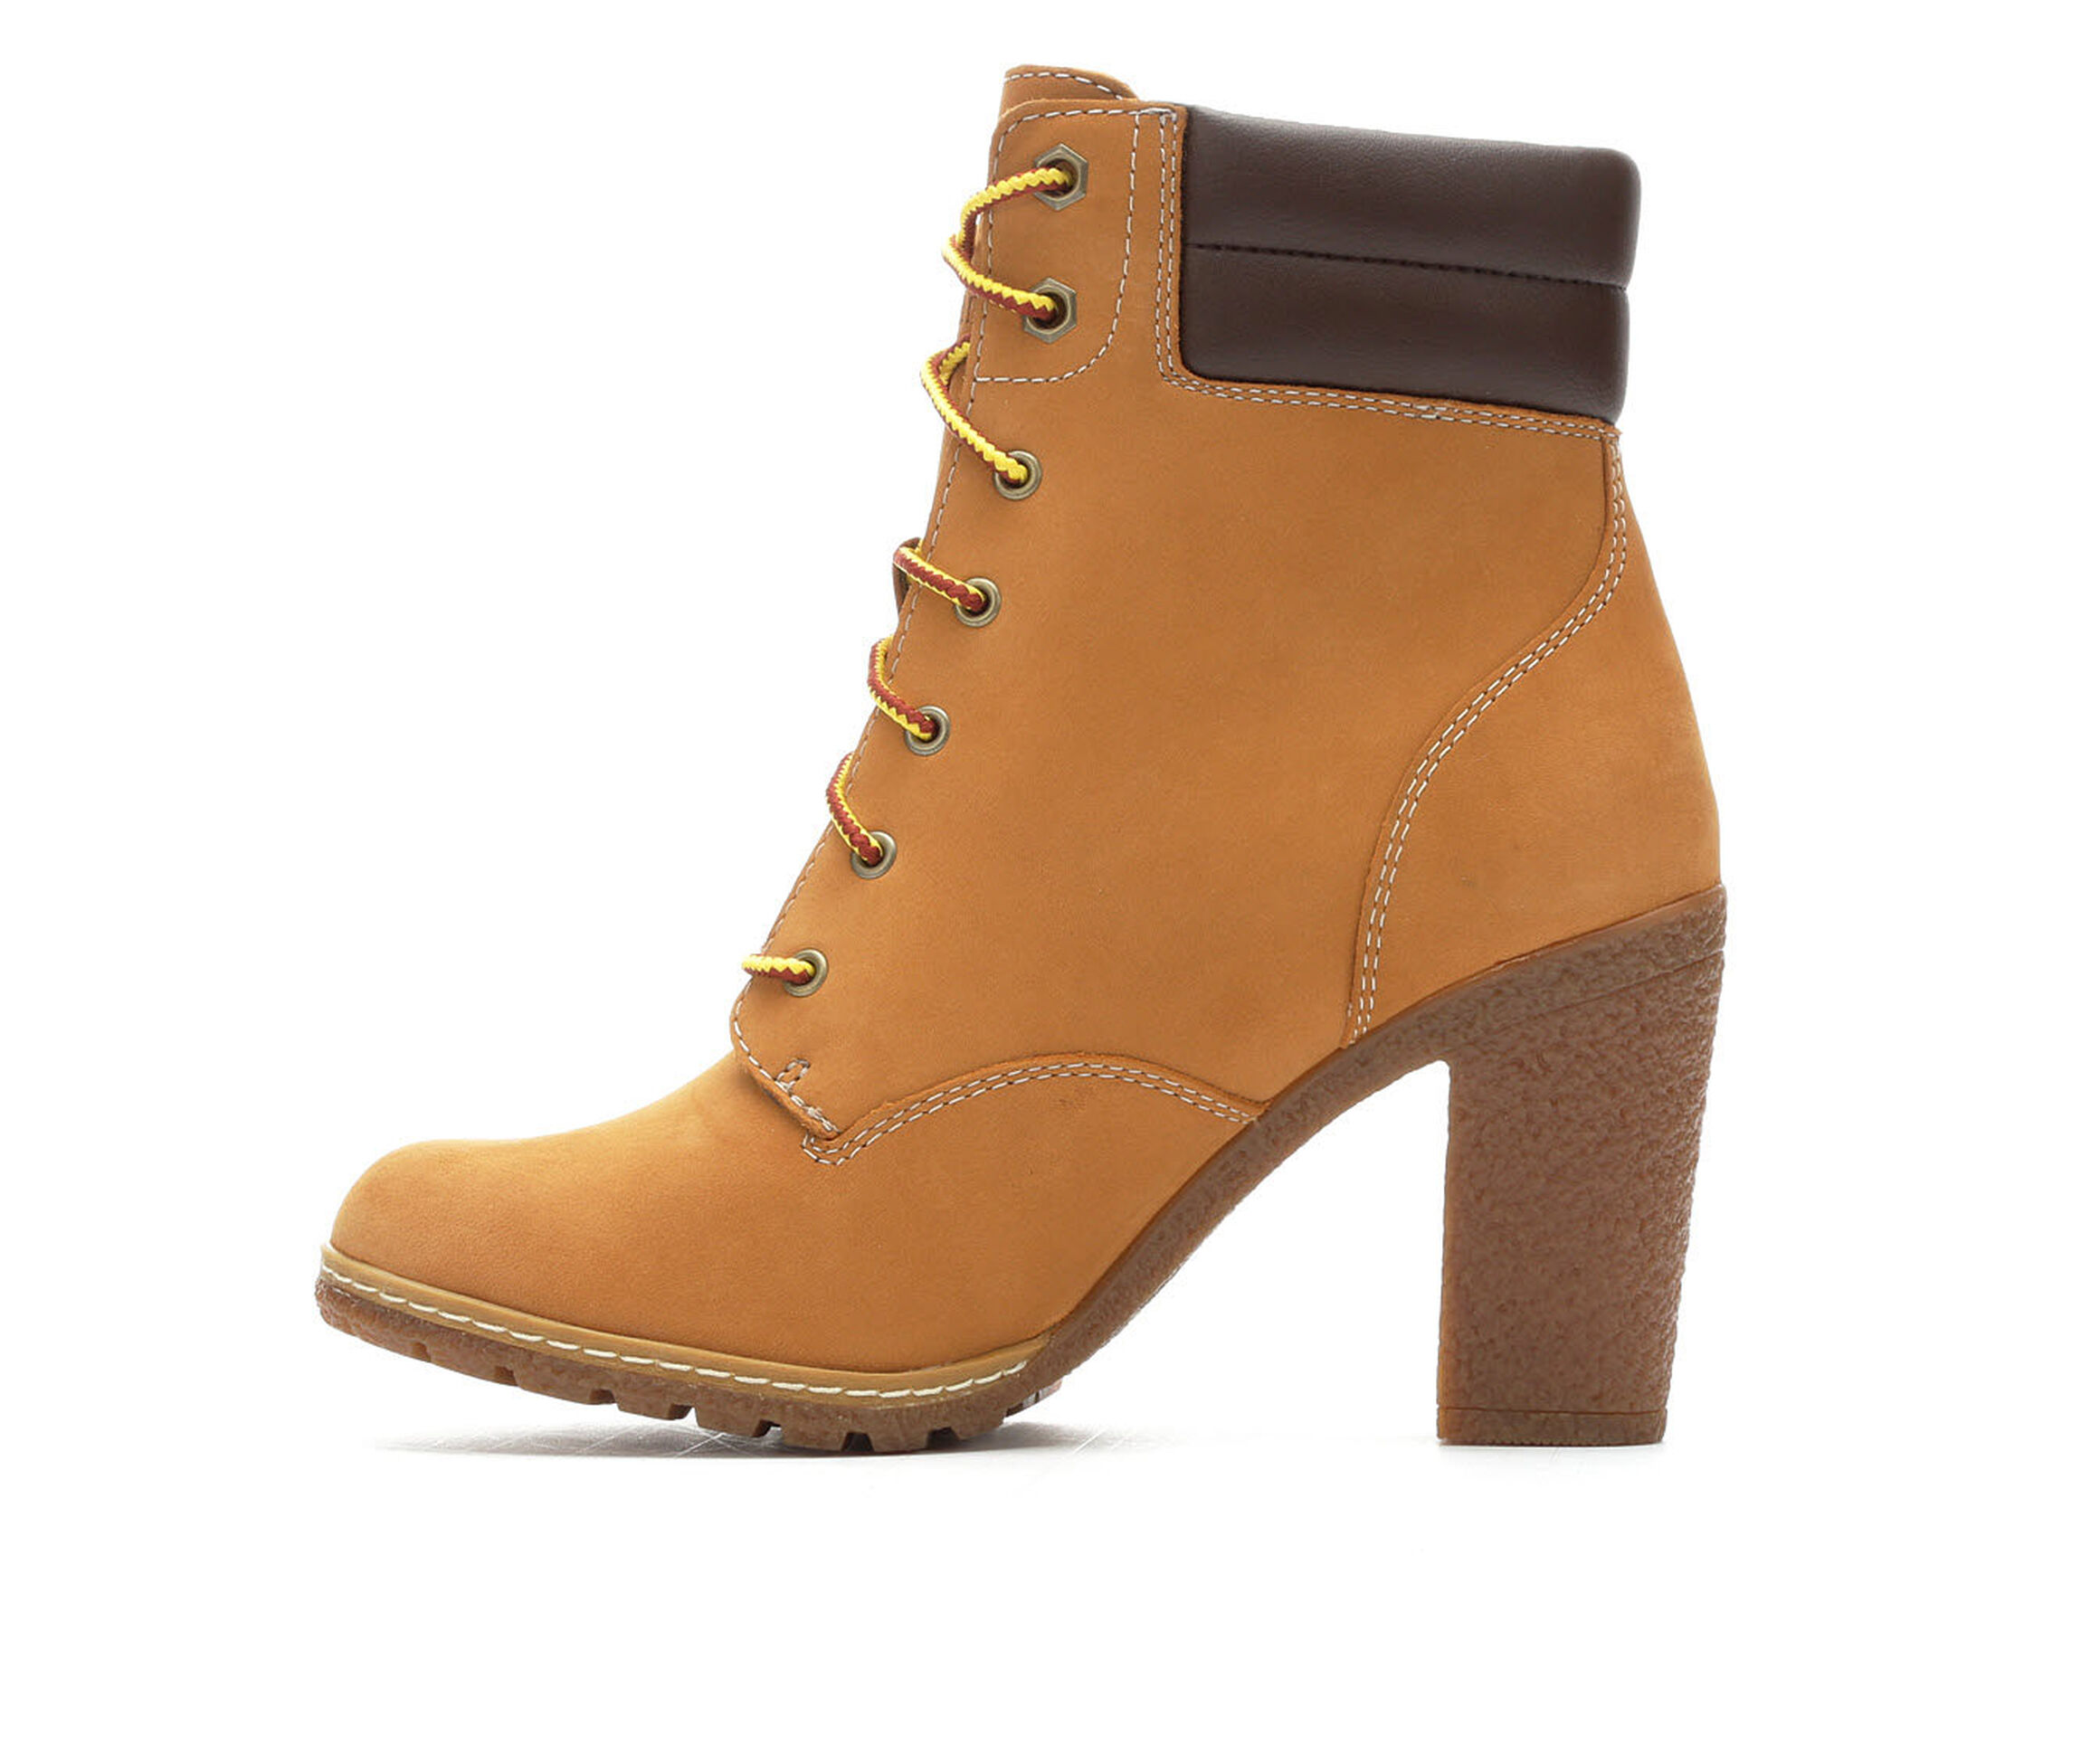 Women's Timberland Shoes & Boots | Shoe Carnival